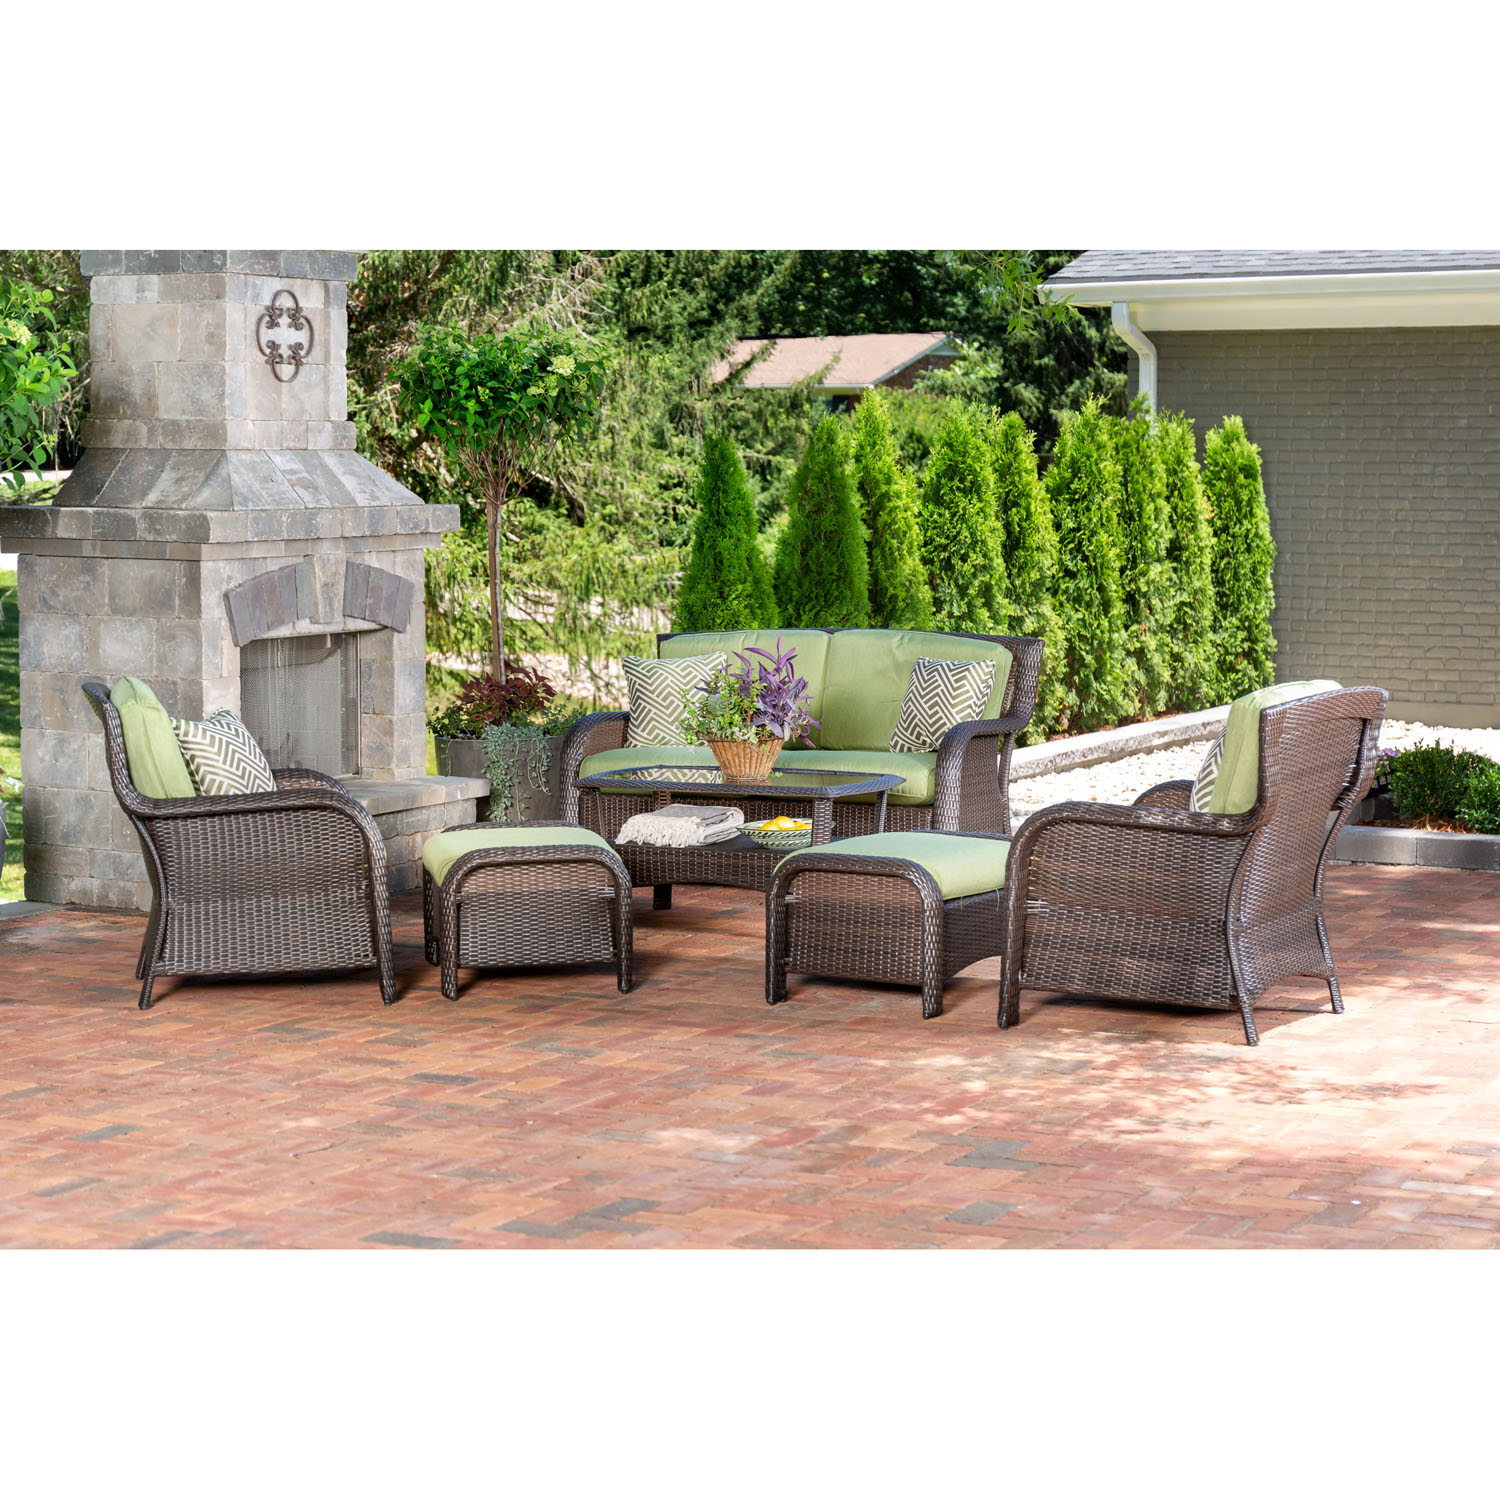 Hanover Strathmere 6-Piece Wicker and Steel Outdoor Conversation Set, Cilantro Green - image 3 of 15